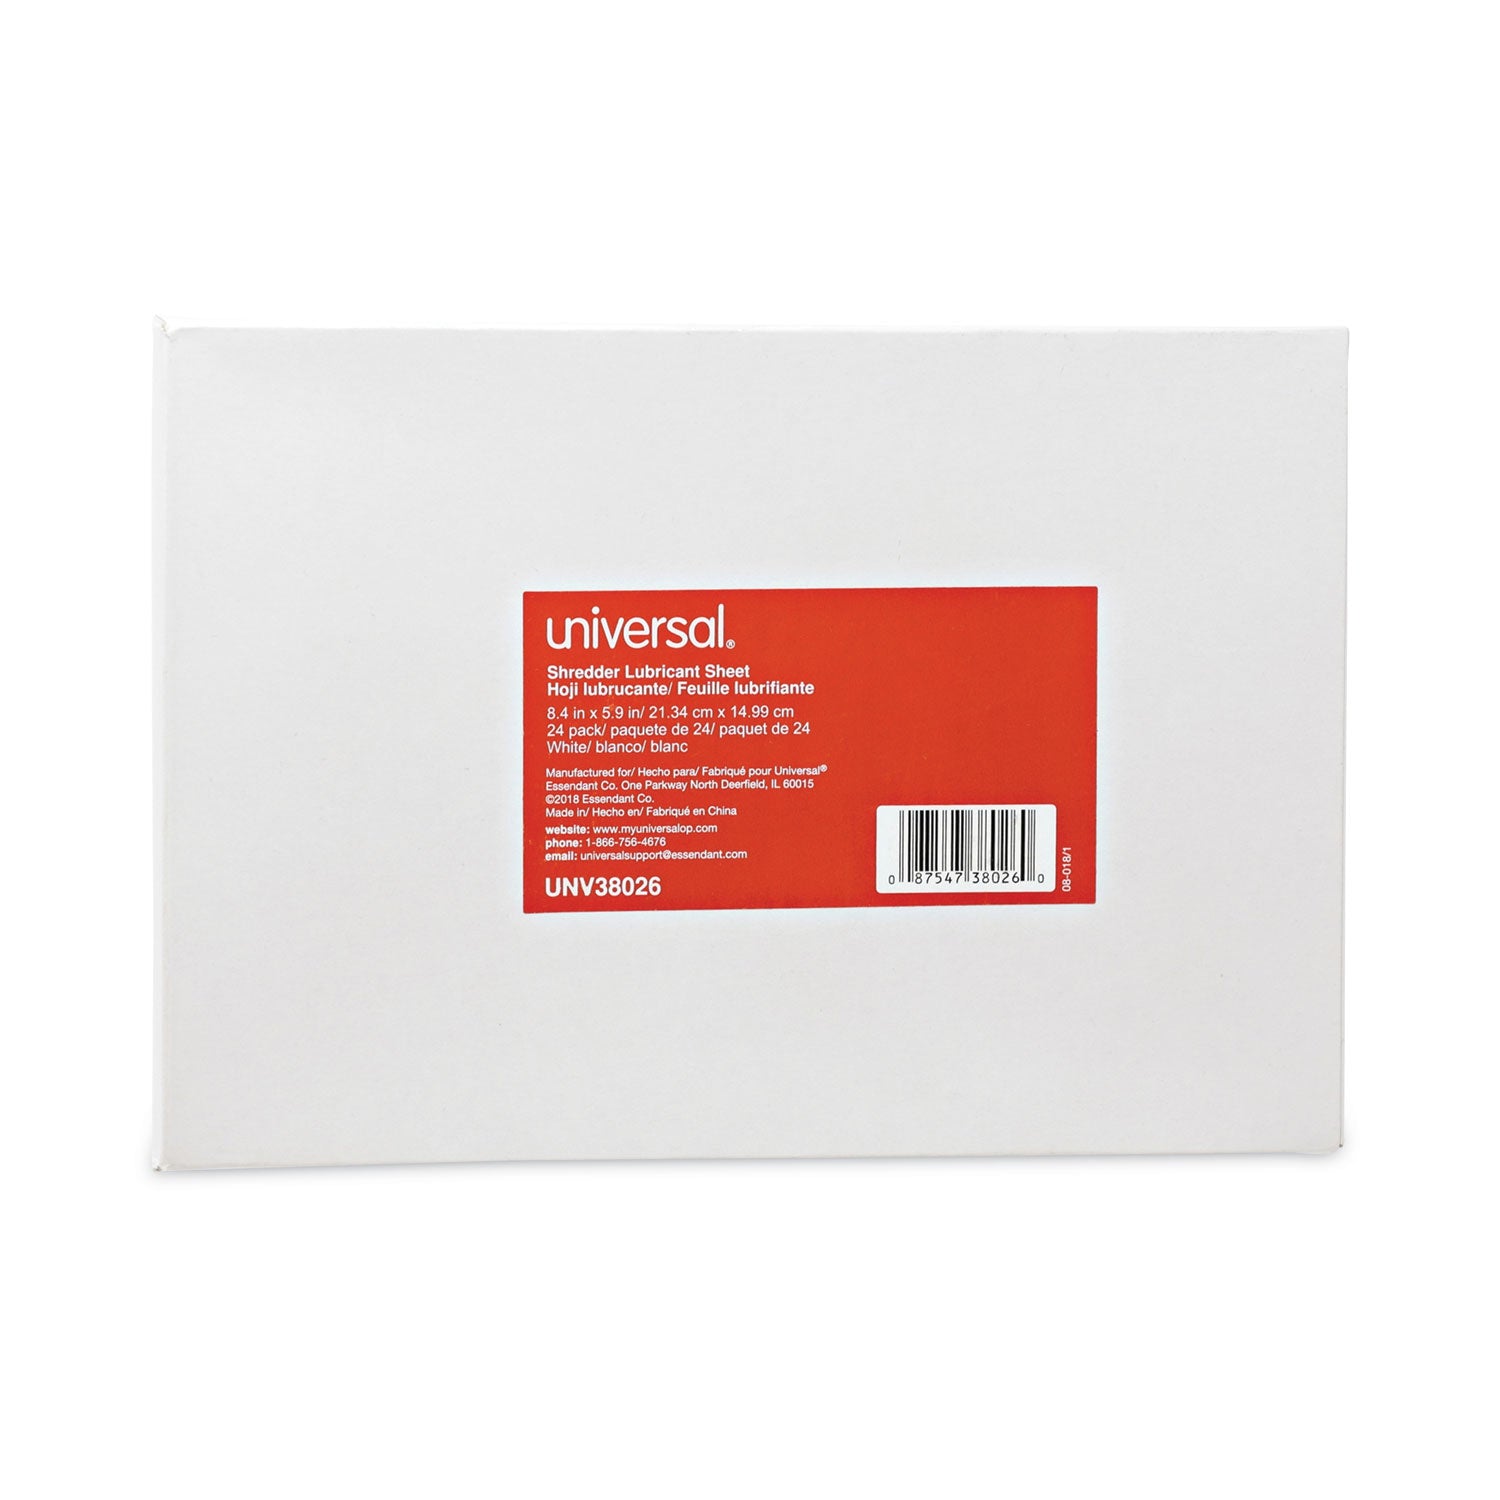 shredder-lubricant-sheets-84-x-59-24-sheets-pack_unv38026 - 2